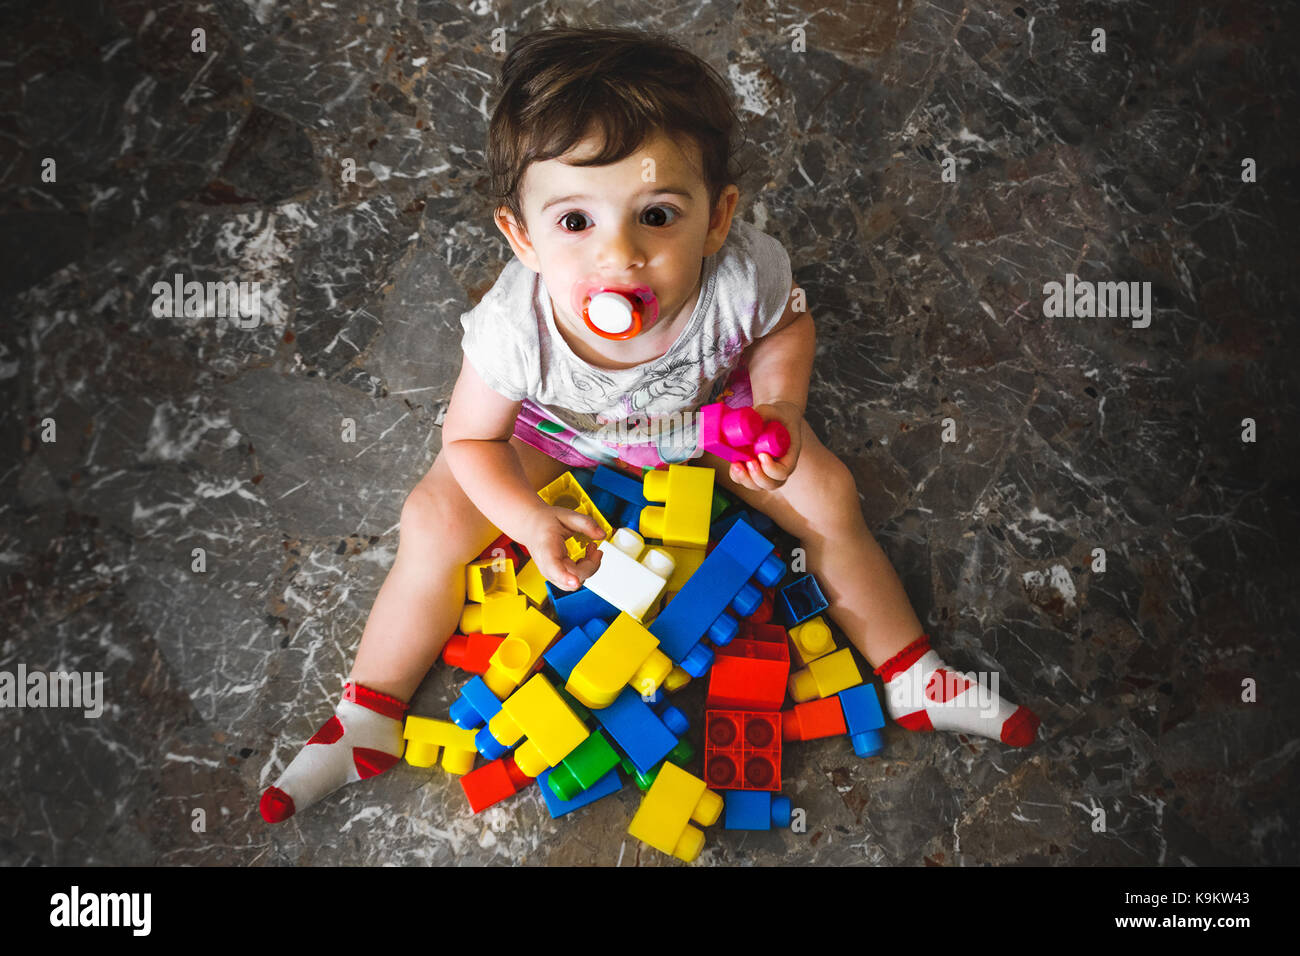 newborn play building blocks - colorful toy bricks - above view of a baby playing with toy bricks - little child play on floor Stock Photo